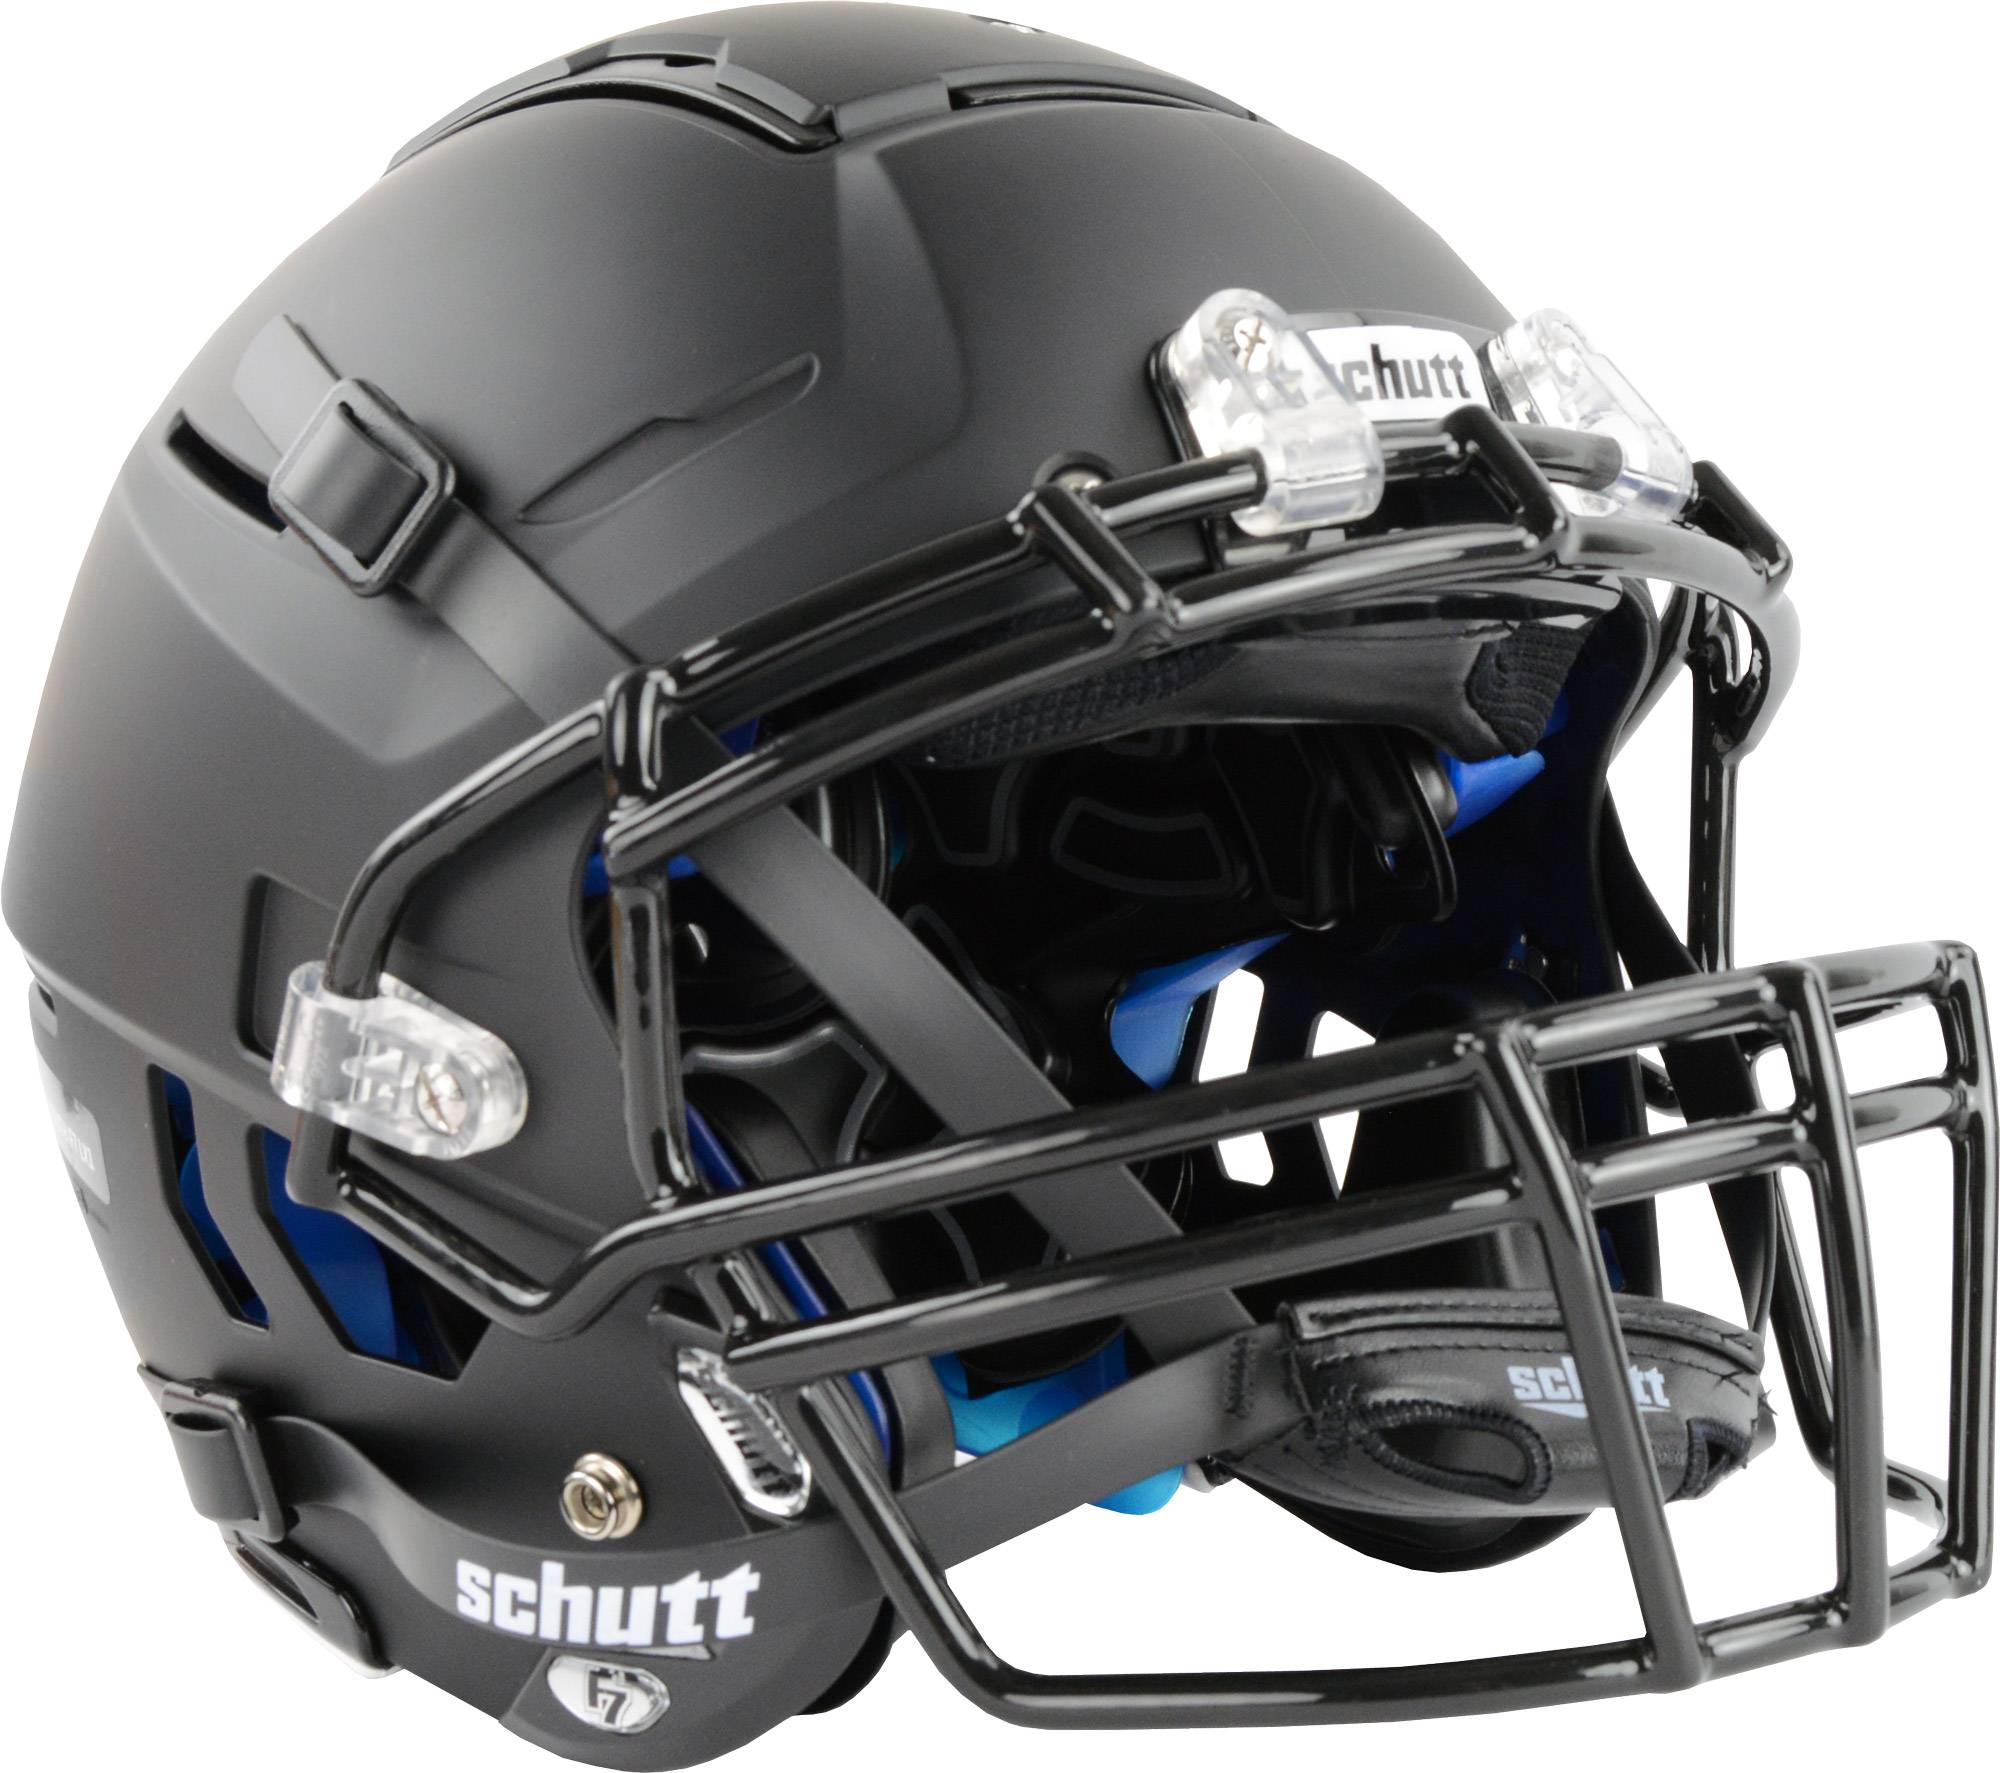 Schutt Sports F7 LX1 Youth Football Helmet with Facemask